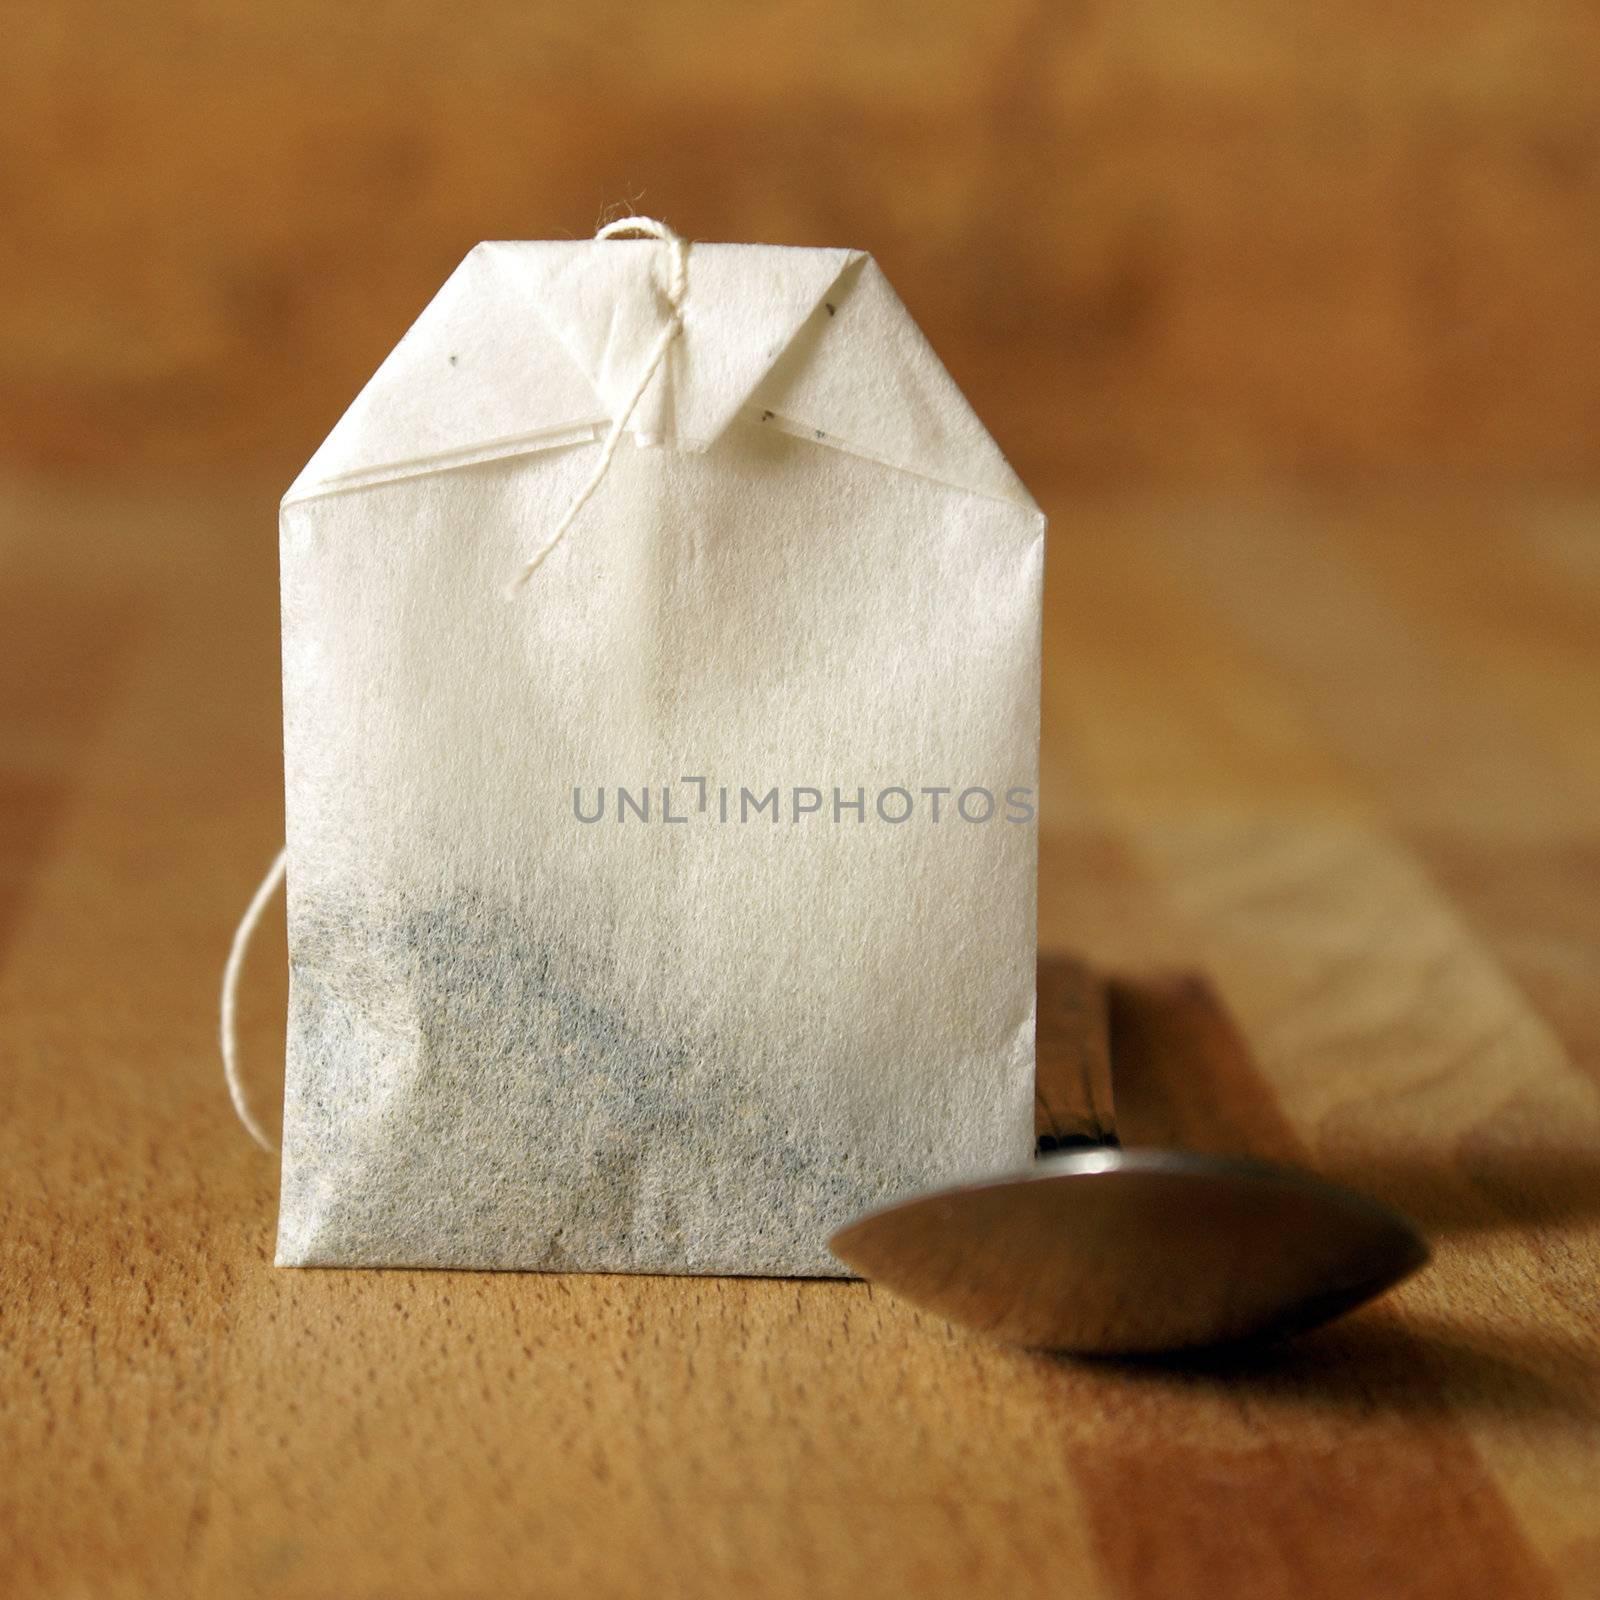 A square format shot of a tea bag and spoon for preparing the beverage.